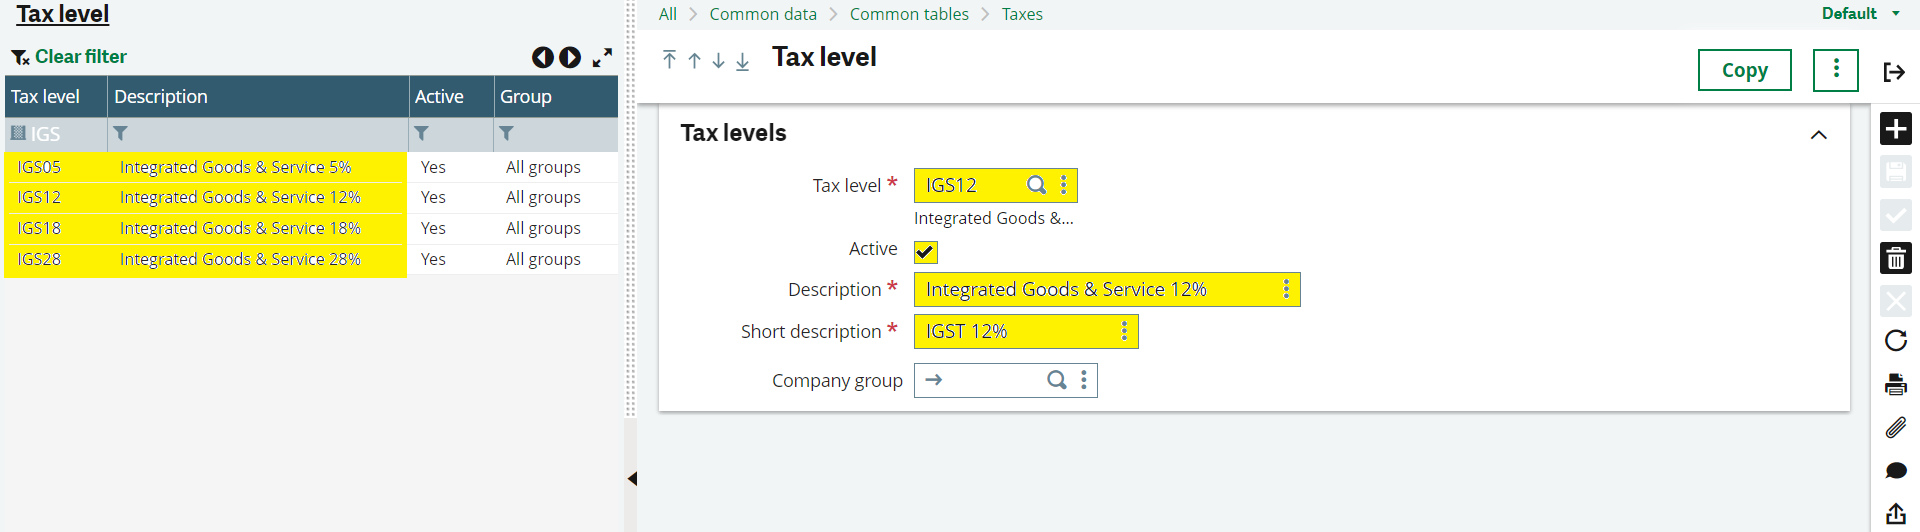 Tax Level in Sage X3